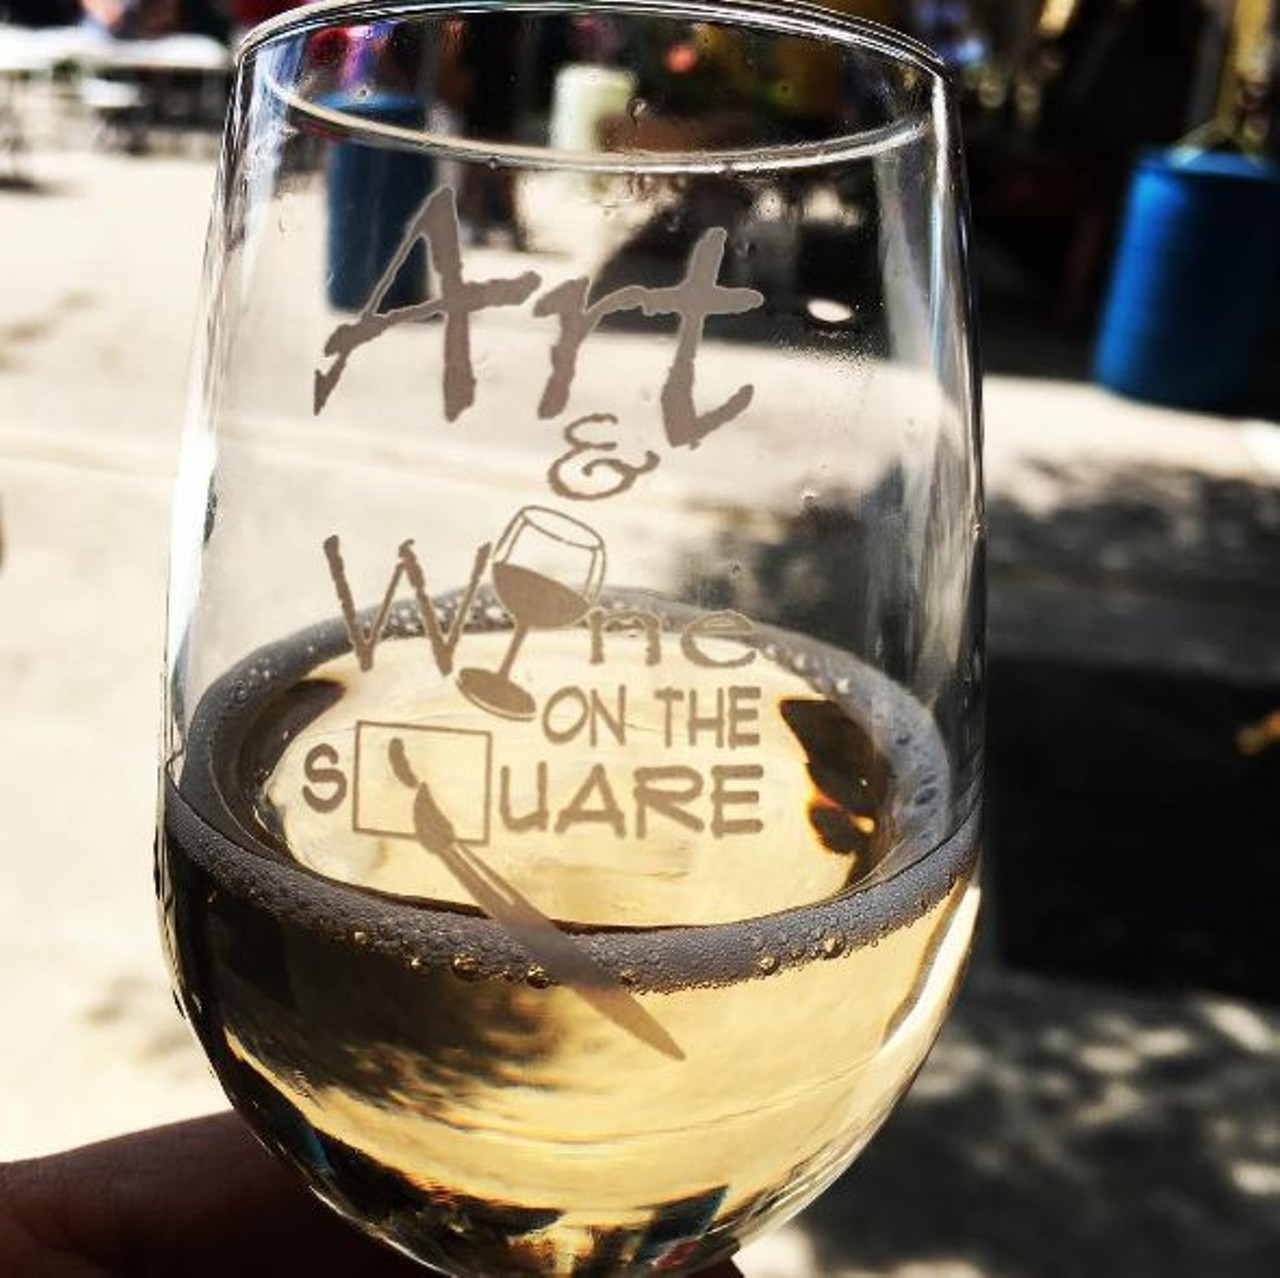 Art and Wine on the Square
April 29, 101 W Central St, Belton, artandwineonthesquare.com
Be there or be square.
Photo via Instagram, ruffled_feathers